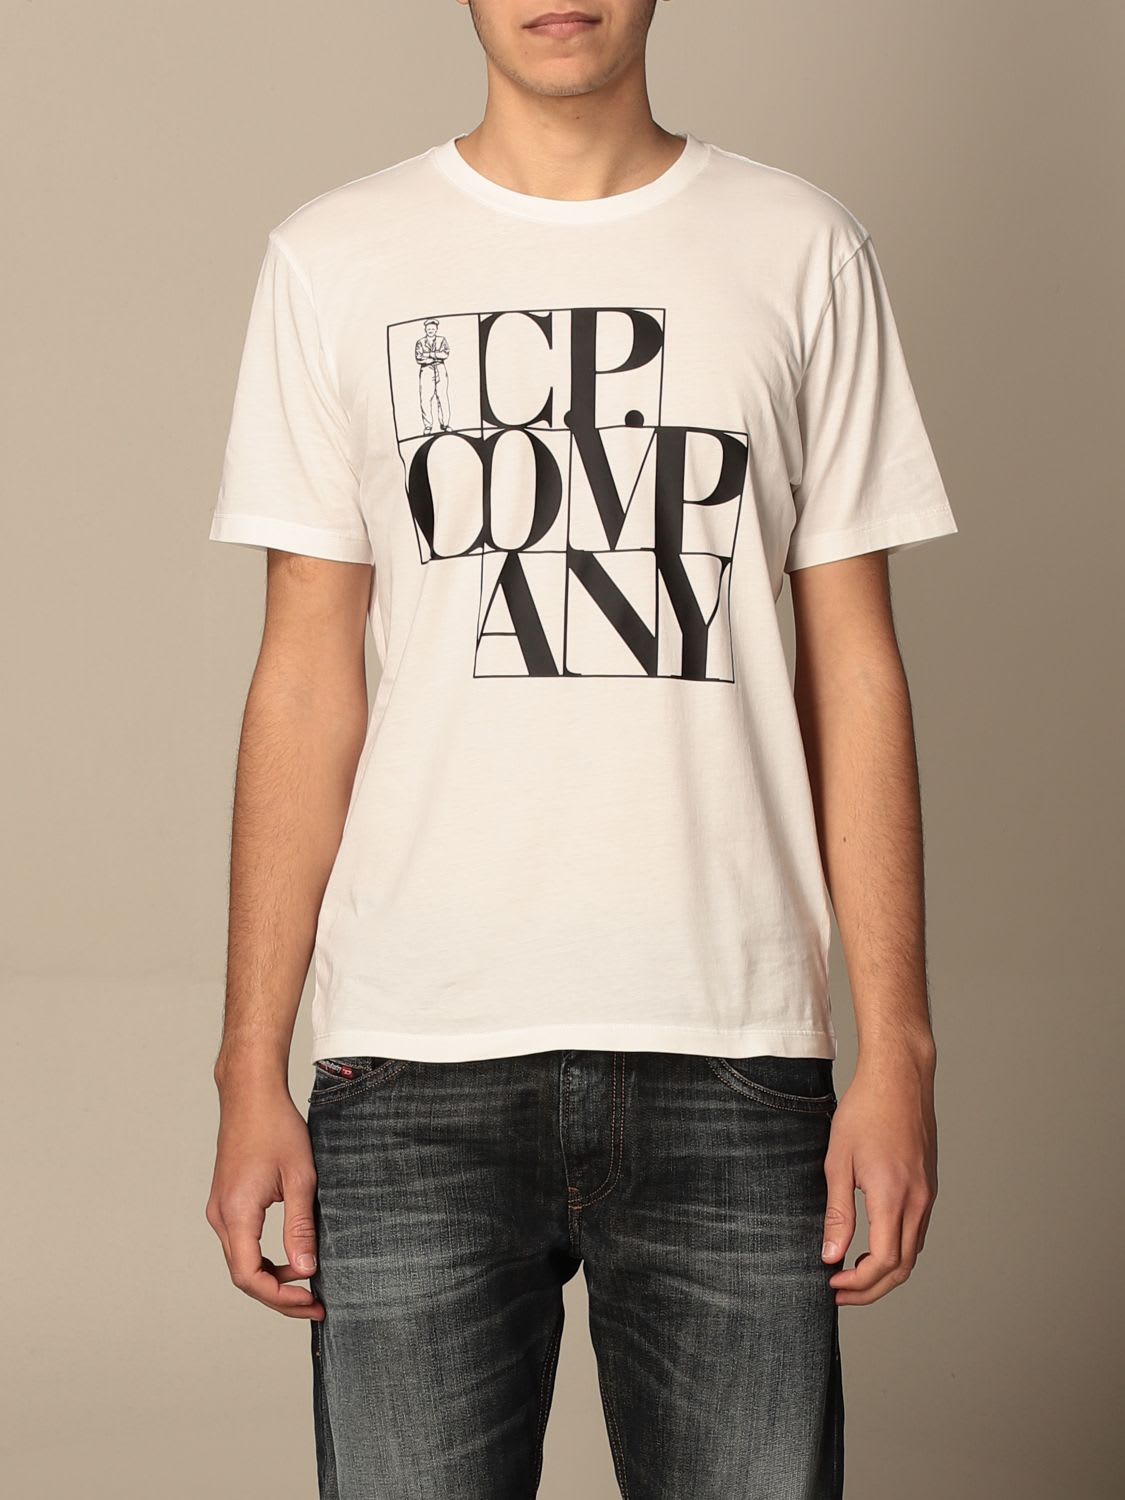 C.P. COMPANY C.P. COMPANY T-SHIRT C.P. T-SHIRT COMPANY IN COTTON WITH BIG LOGO,10CMTS064A005100W 103